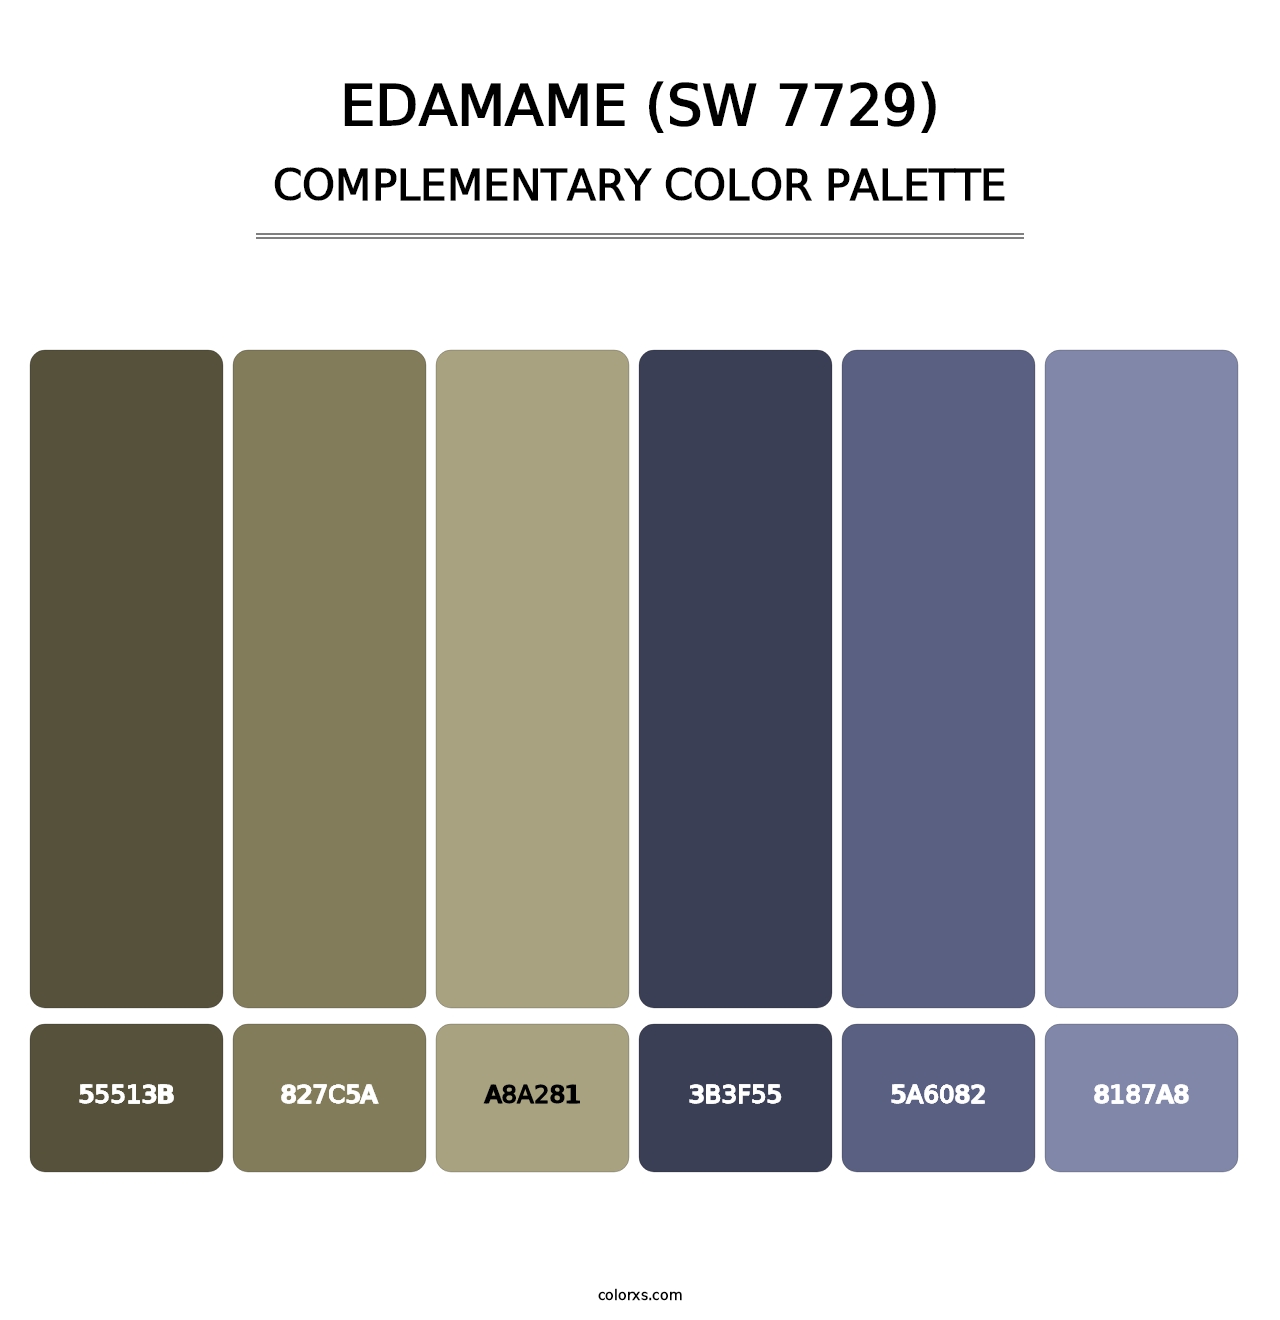 Edamame (SW 7729) - Complementary Color Palette